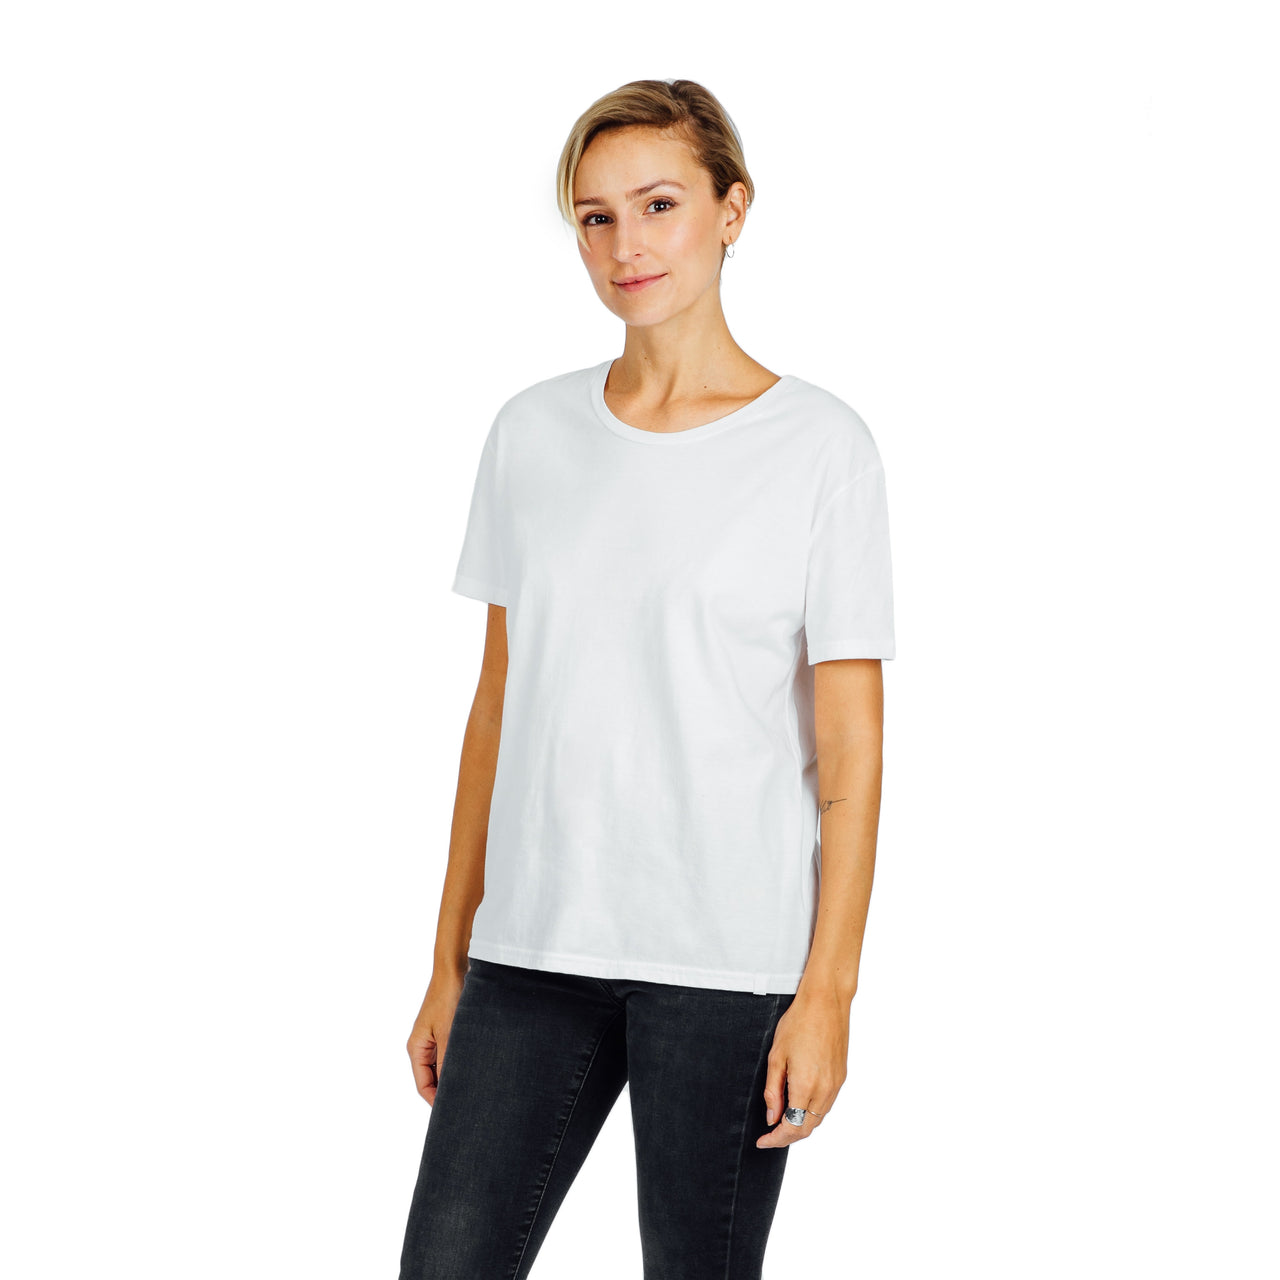 Women's Relaxed Fit Tee- White